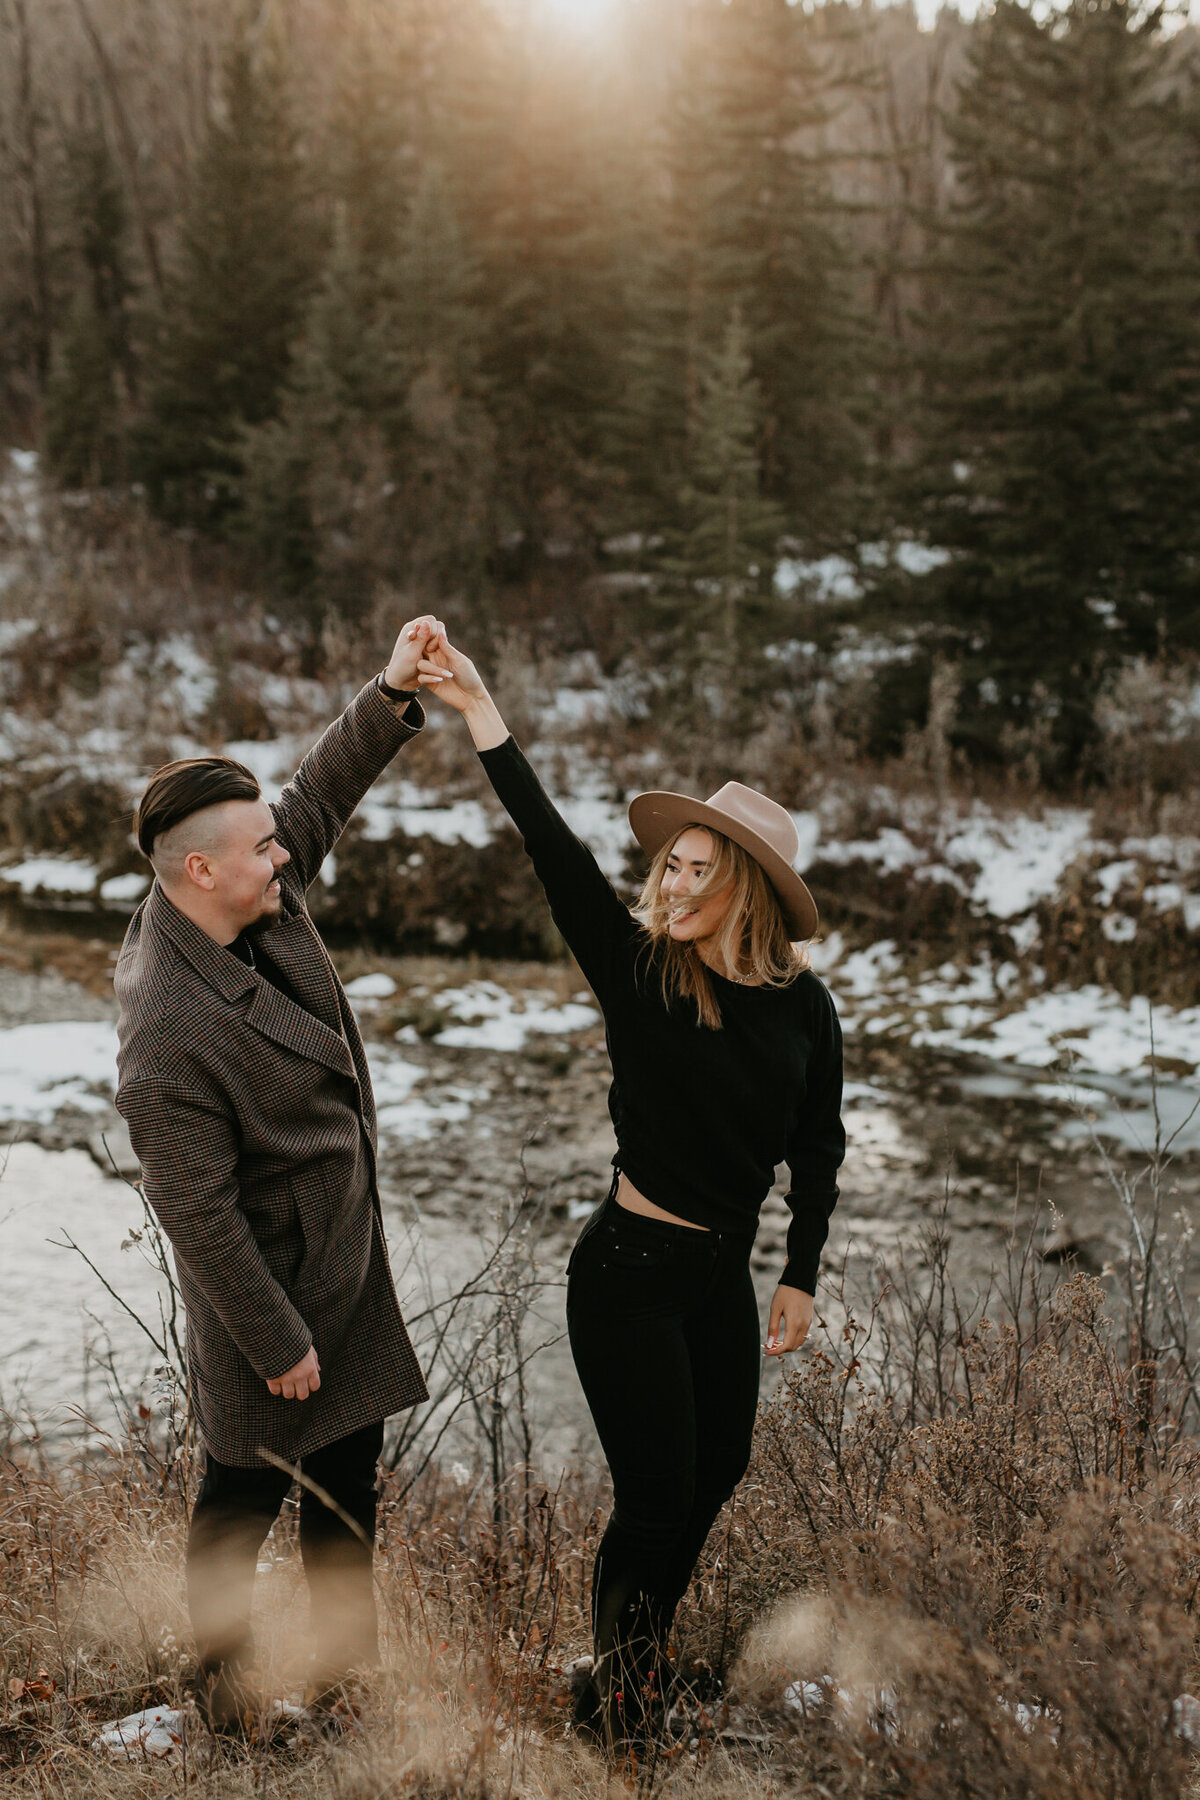 Couple dancing in the mountains at sunset captured by Nikki Collette Photography, adventurous and romantic wedding photographer in Red Deer, Alberta. Featured on the Bronte Bride Vendor Guide.